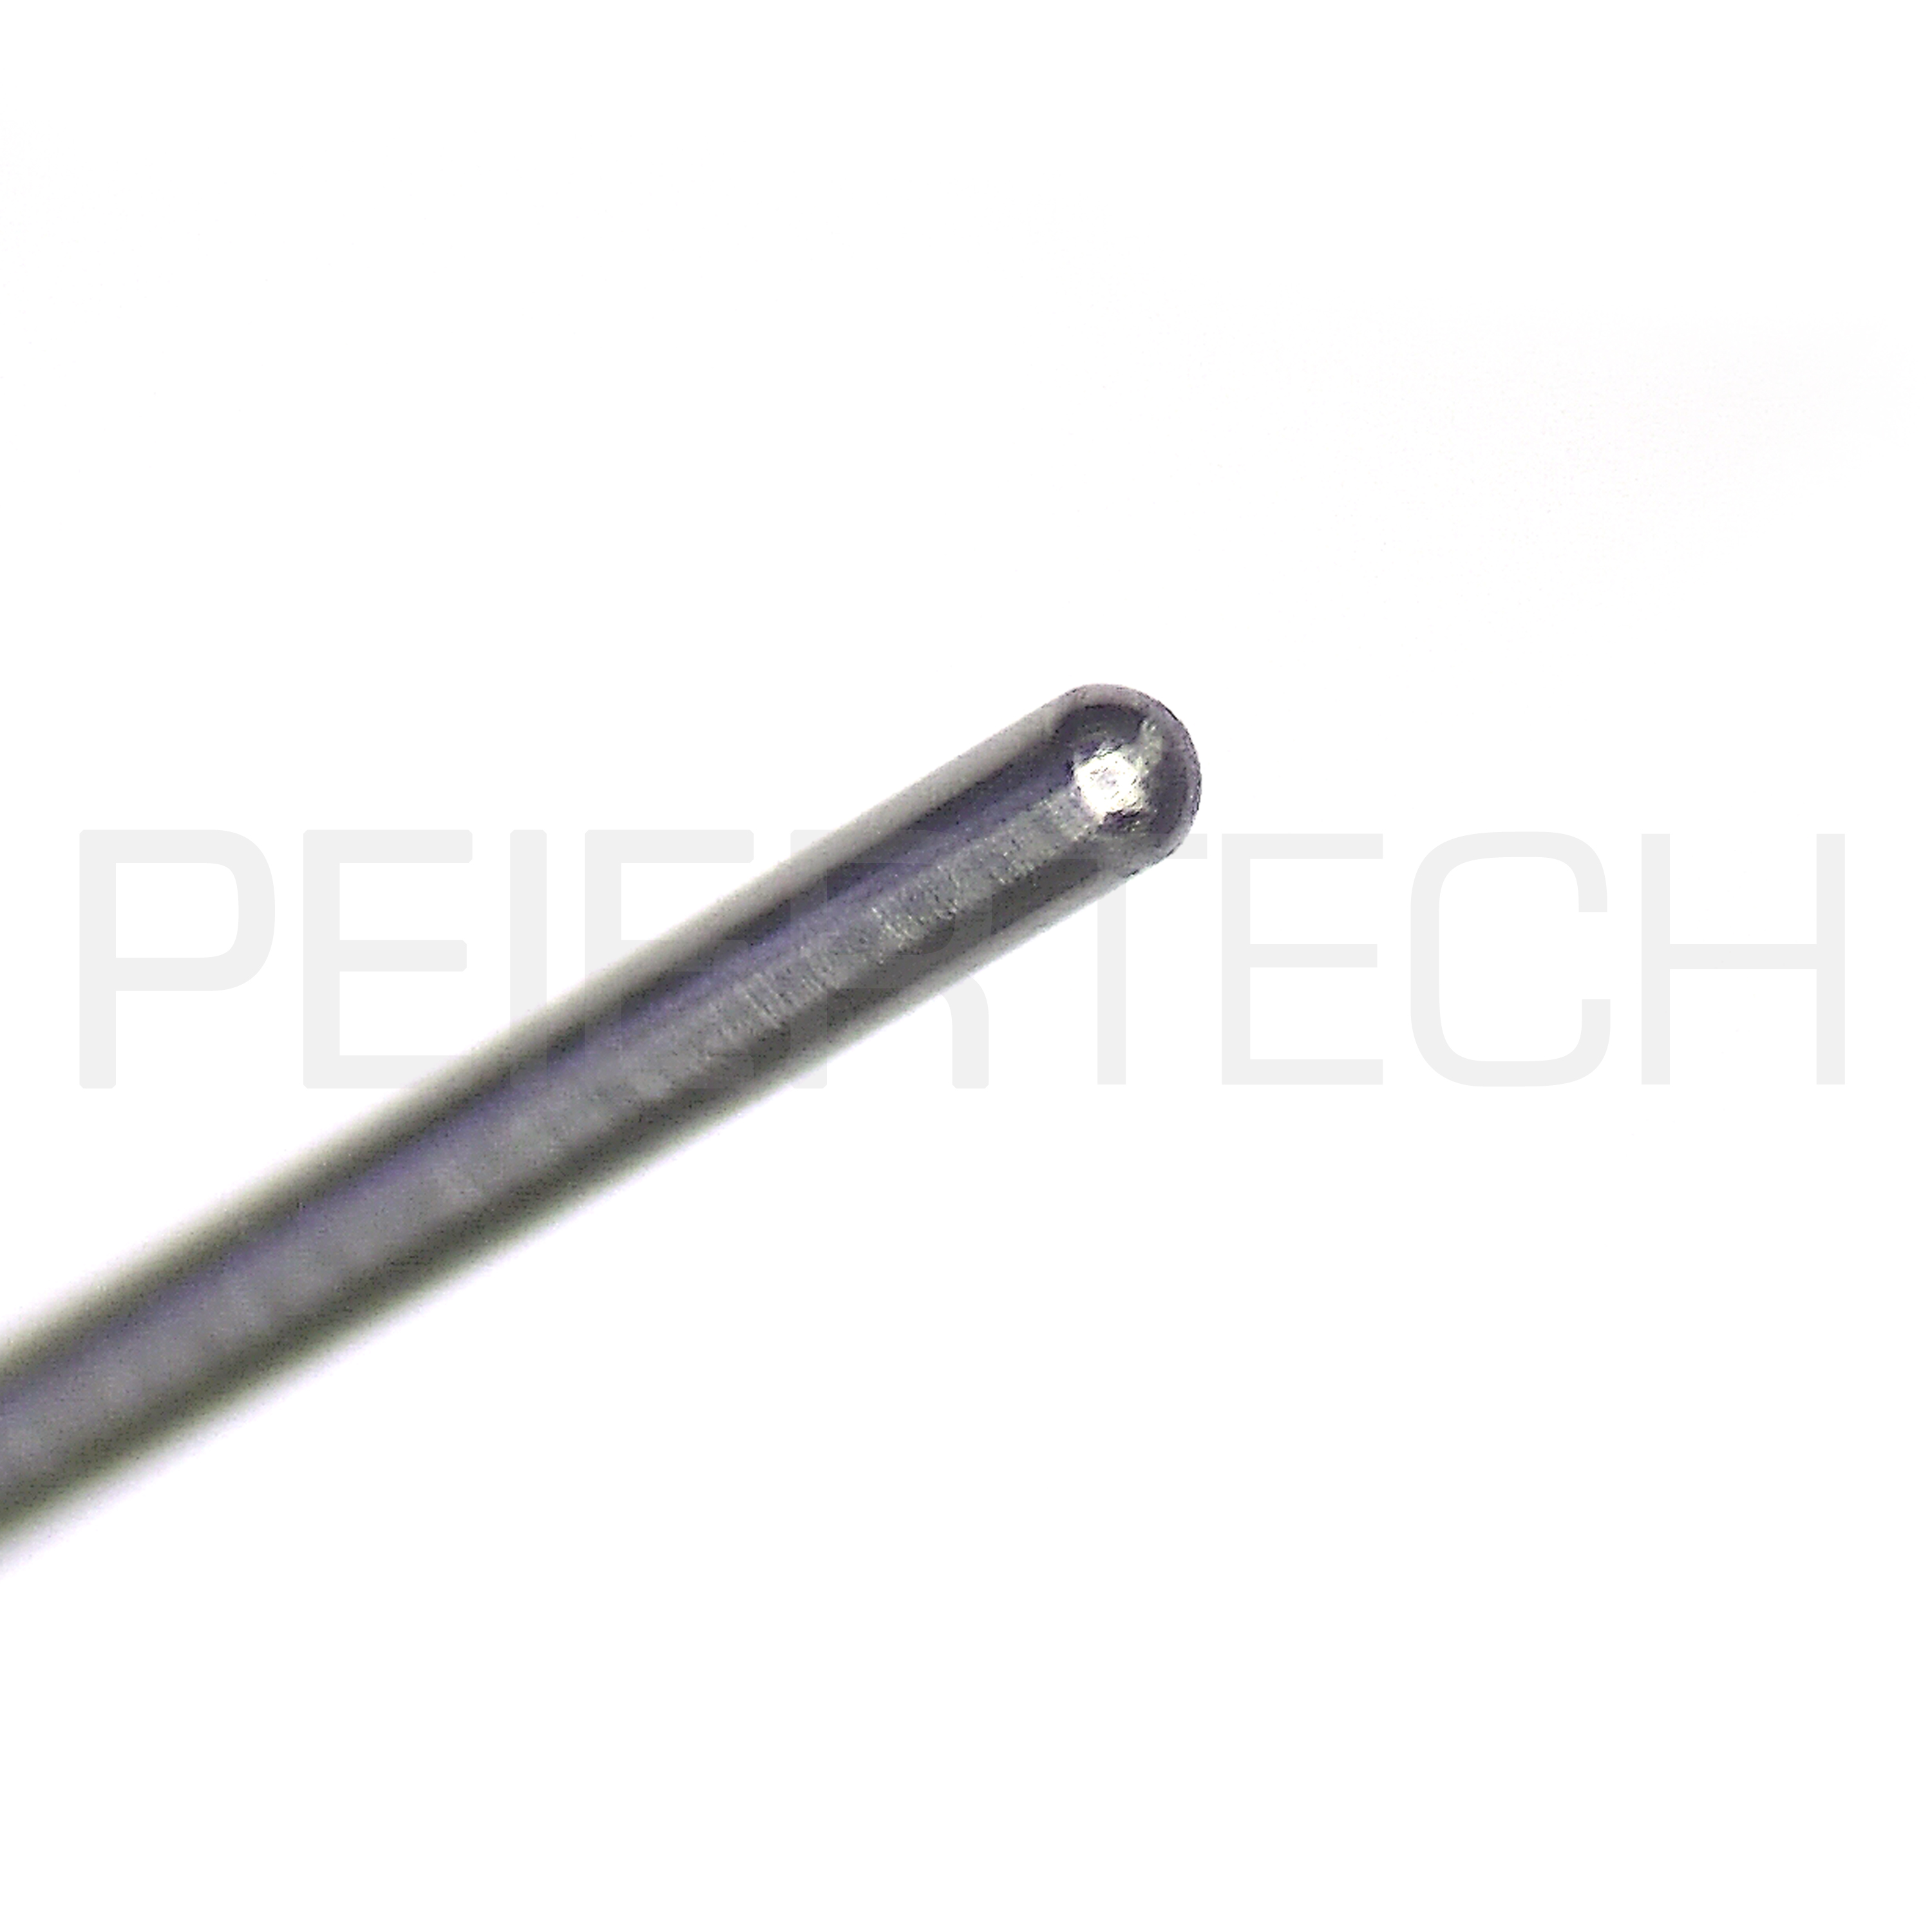 Precision Processing Laser Welding Turn-key Precision Manufacture Turn-key manufacturing of precision components from material to final device assembly